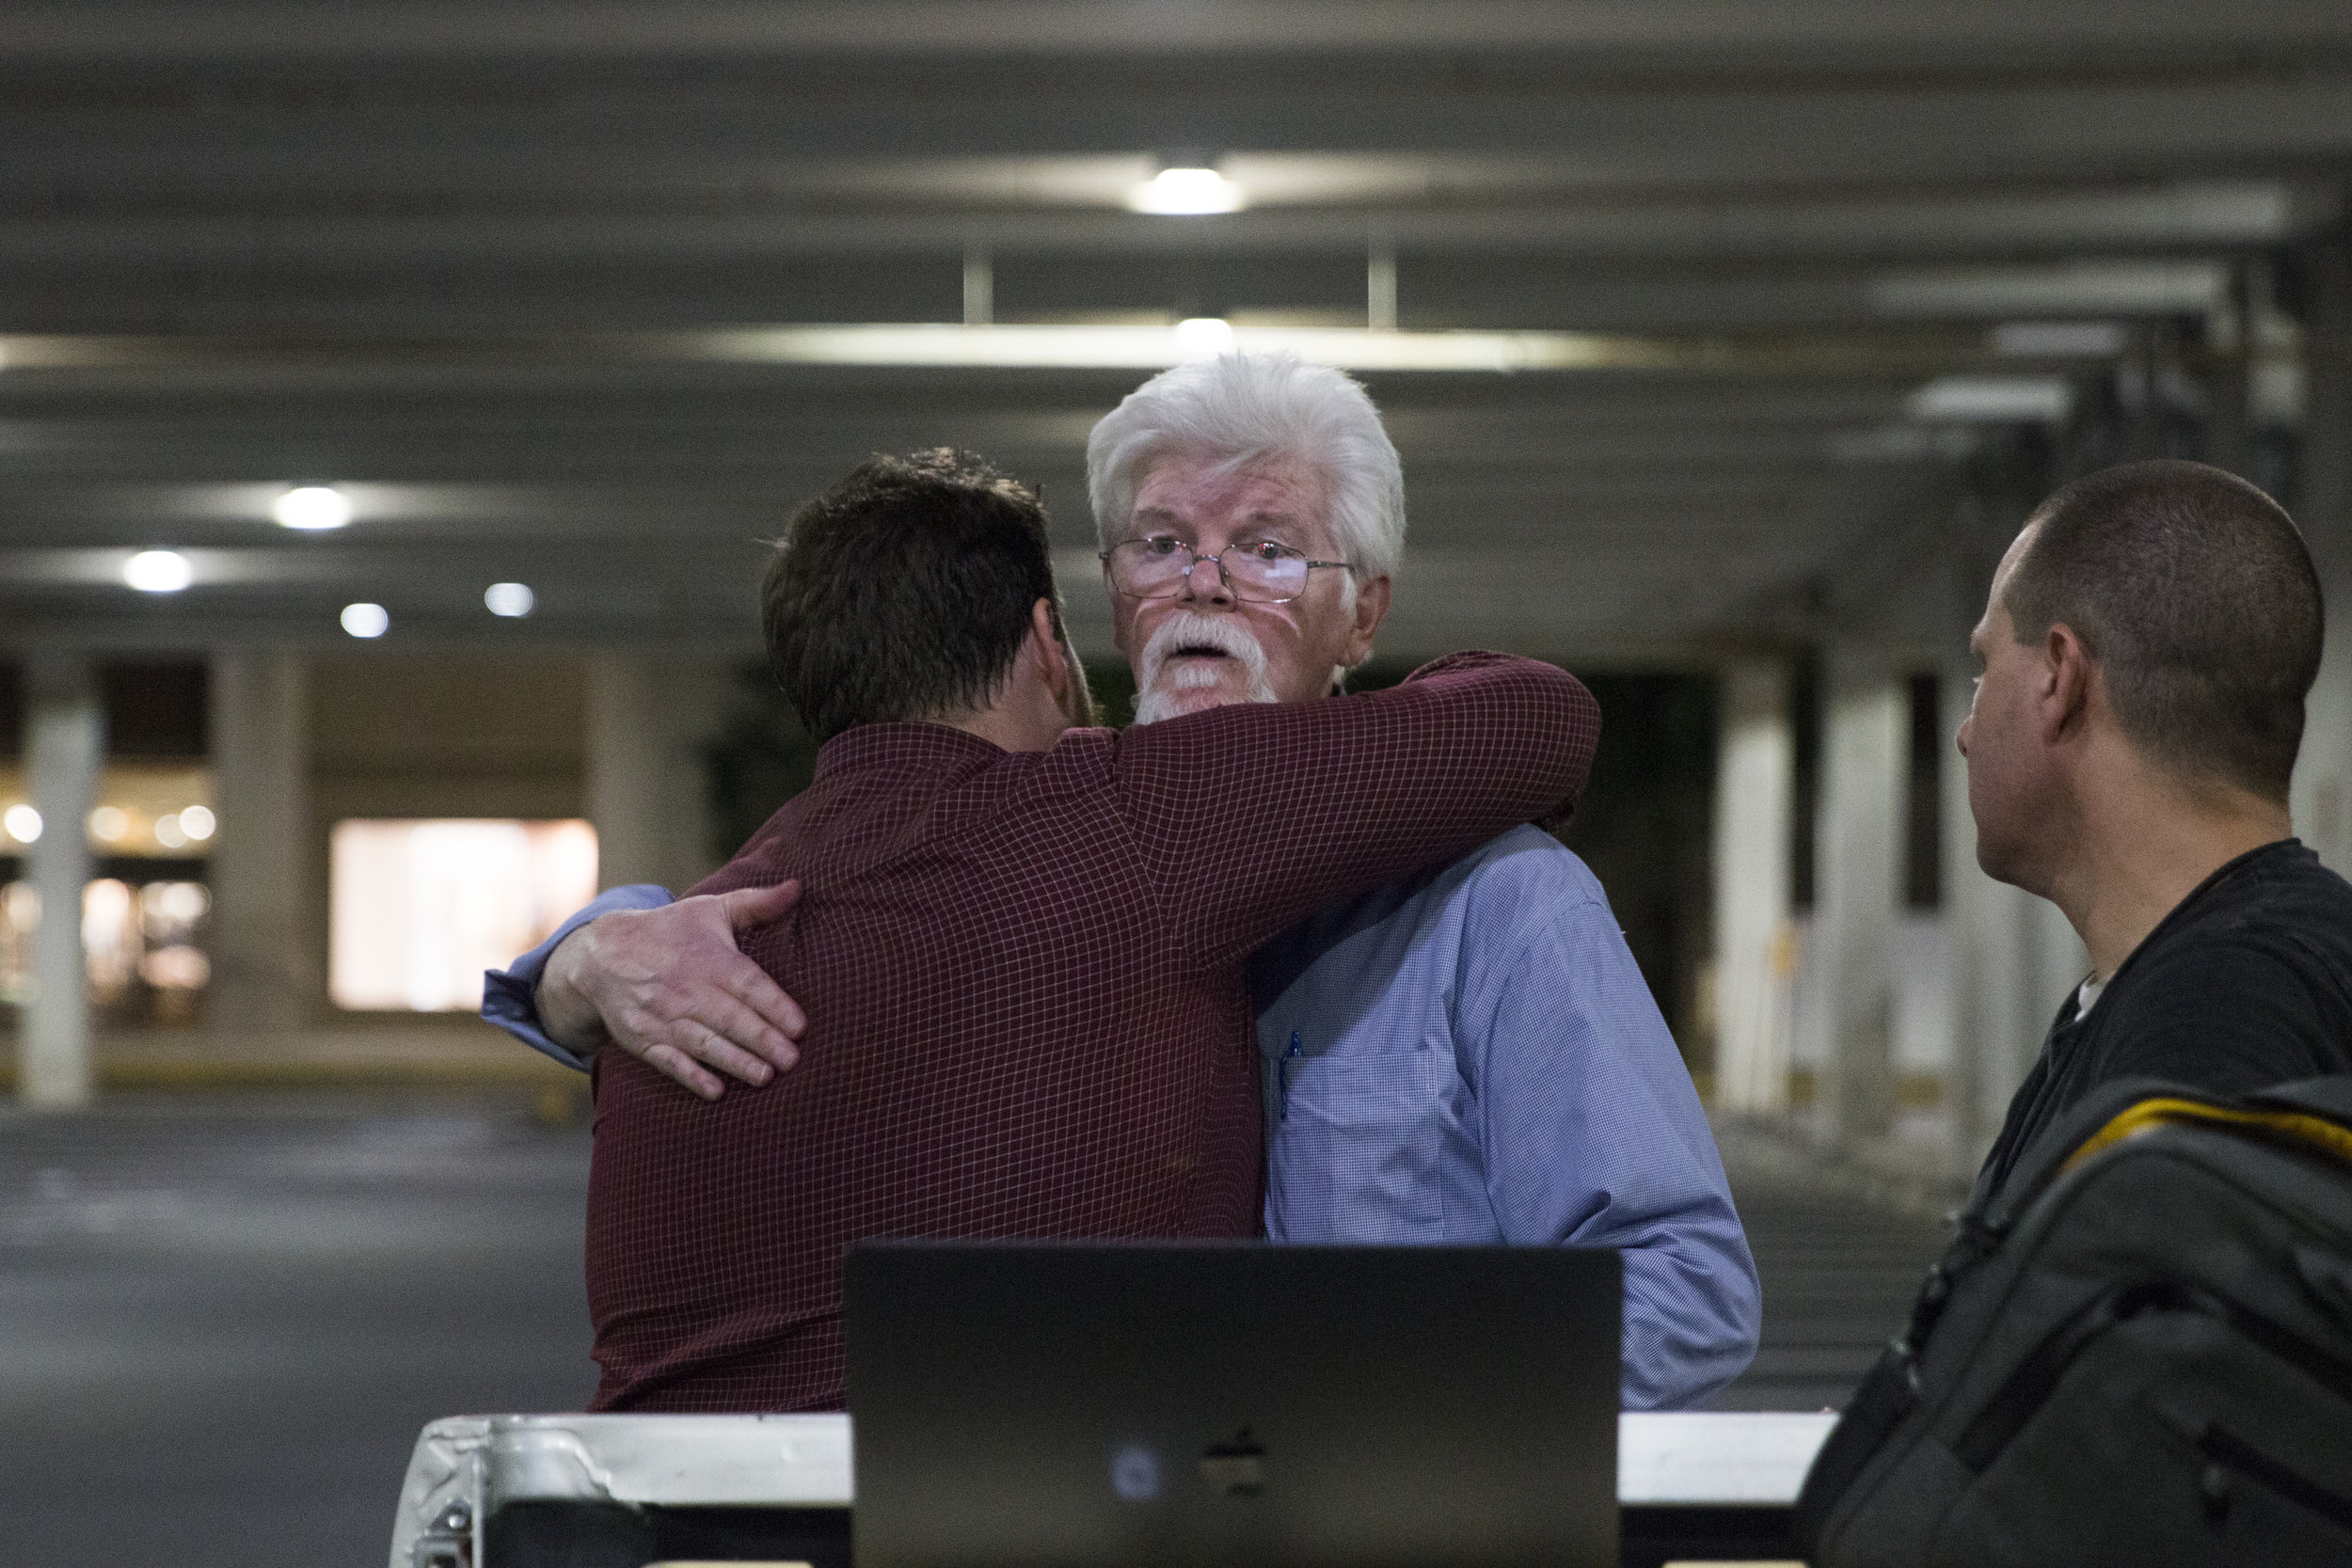  Capital reporters Pat Furgurson and Chase Cook, surviving journalists of the deadliest attack on a newsroom in modern U.S. history, hug goodbye after finishing writing the story for the next day’s paper in a parking lot across the street from their 